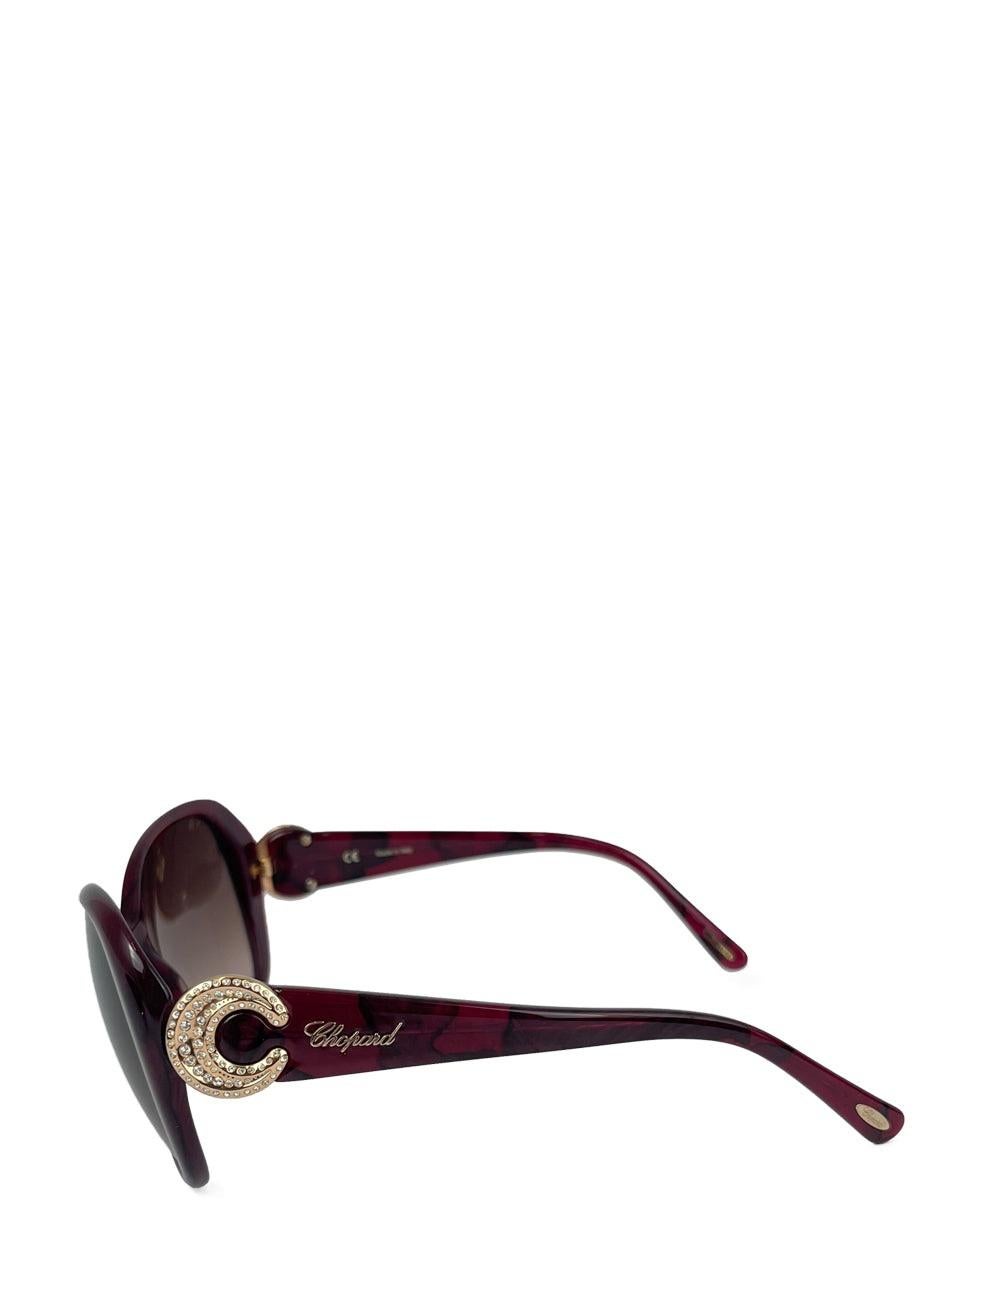 Chopard Deep Purple Cat Eye Sunglasses

Additional information:
Hardware: Acetate
Lens: Brown
Size: 58/17/140
Condition: Excellent
Extras: Includes original box
